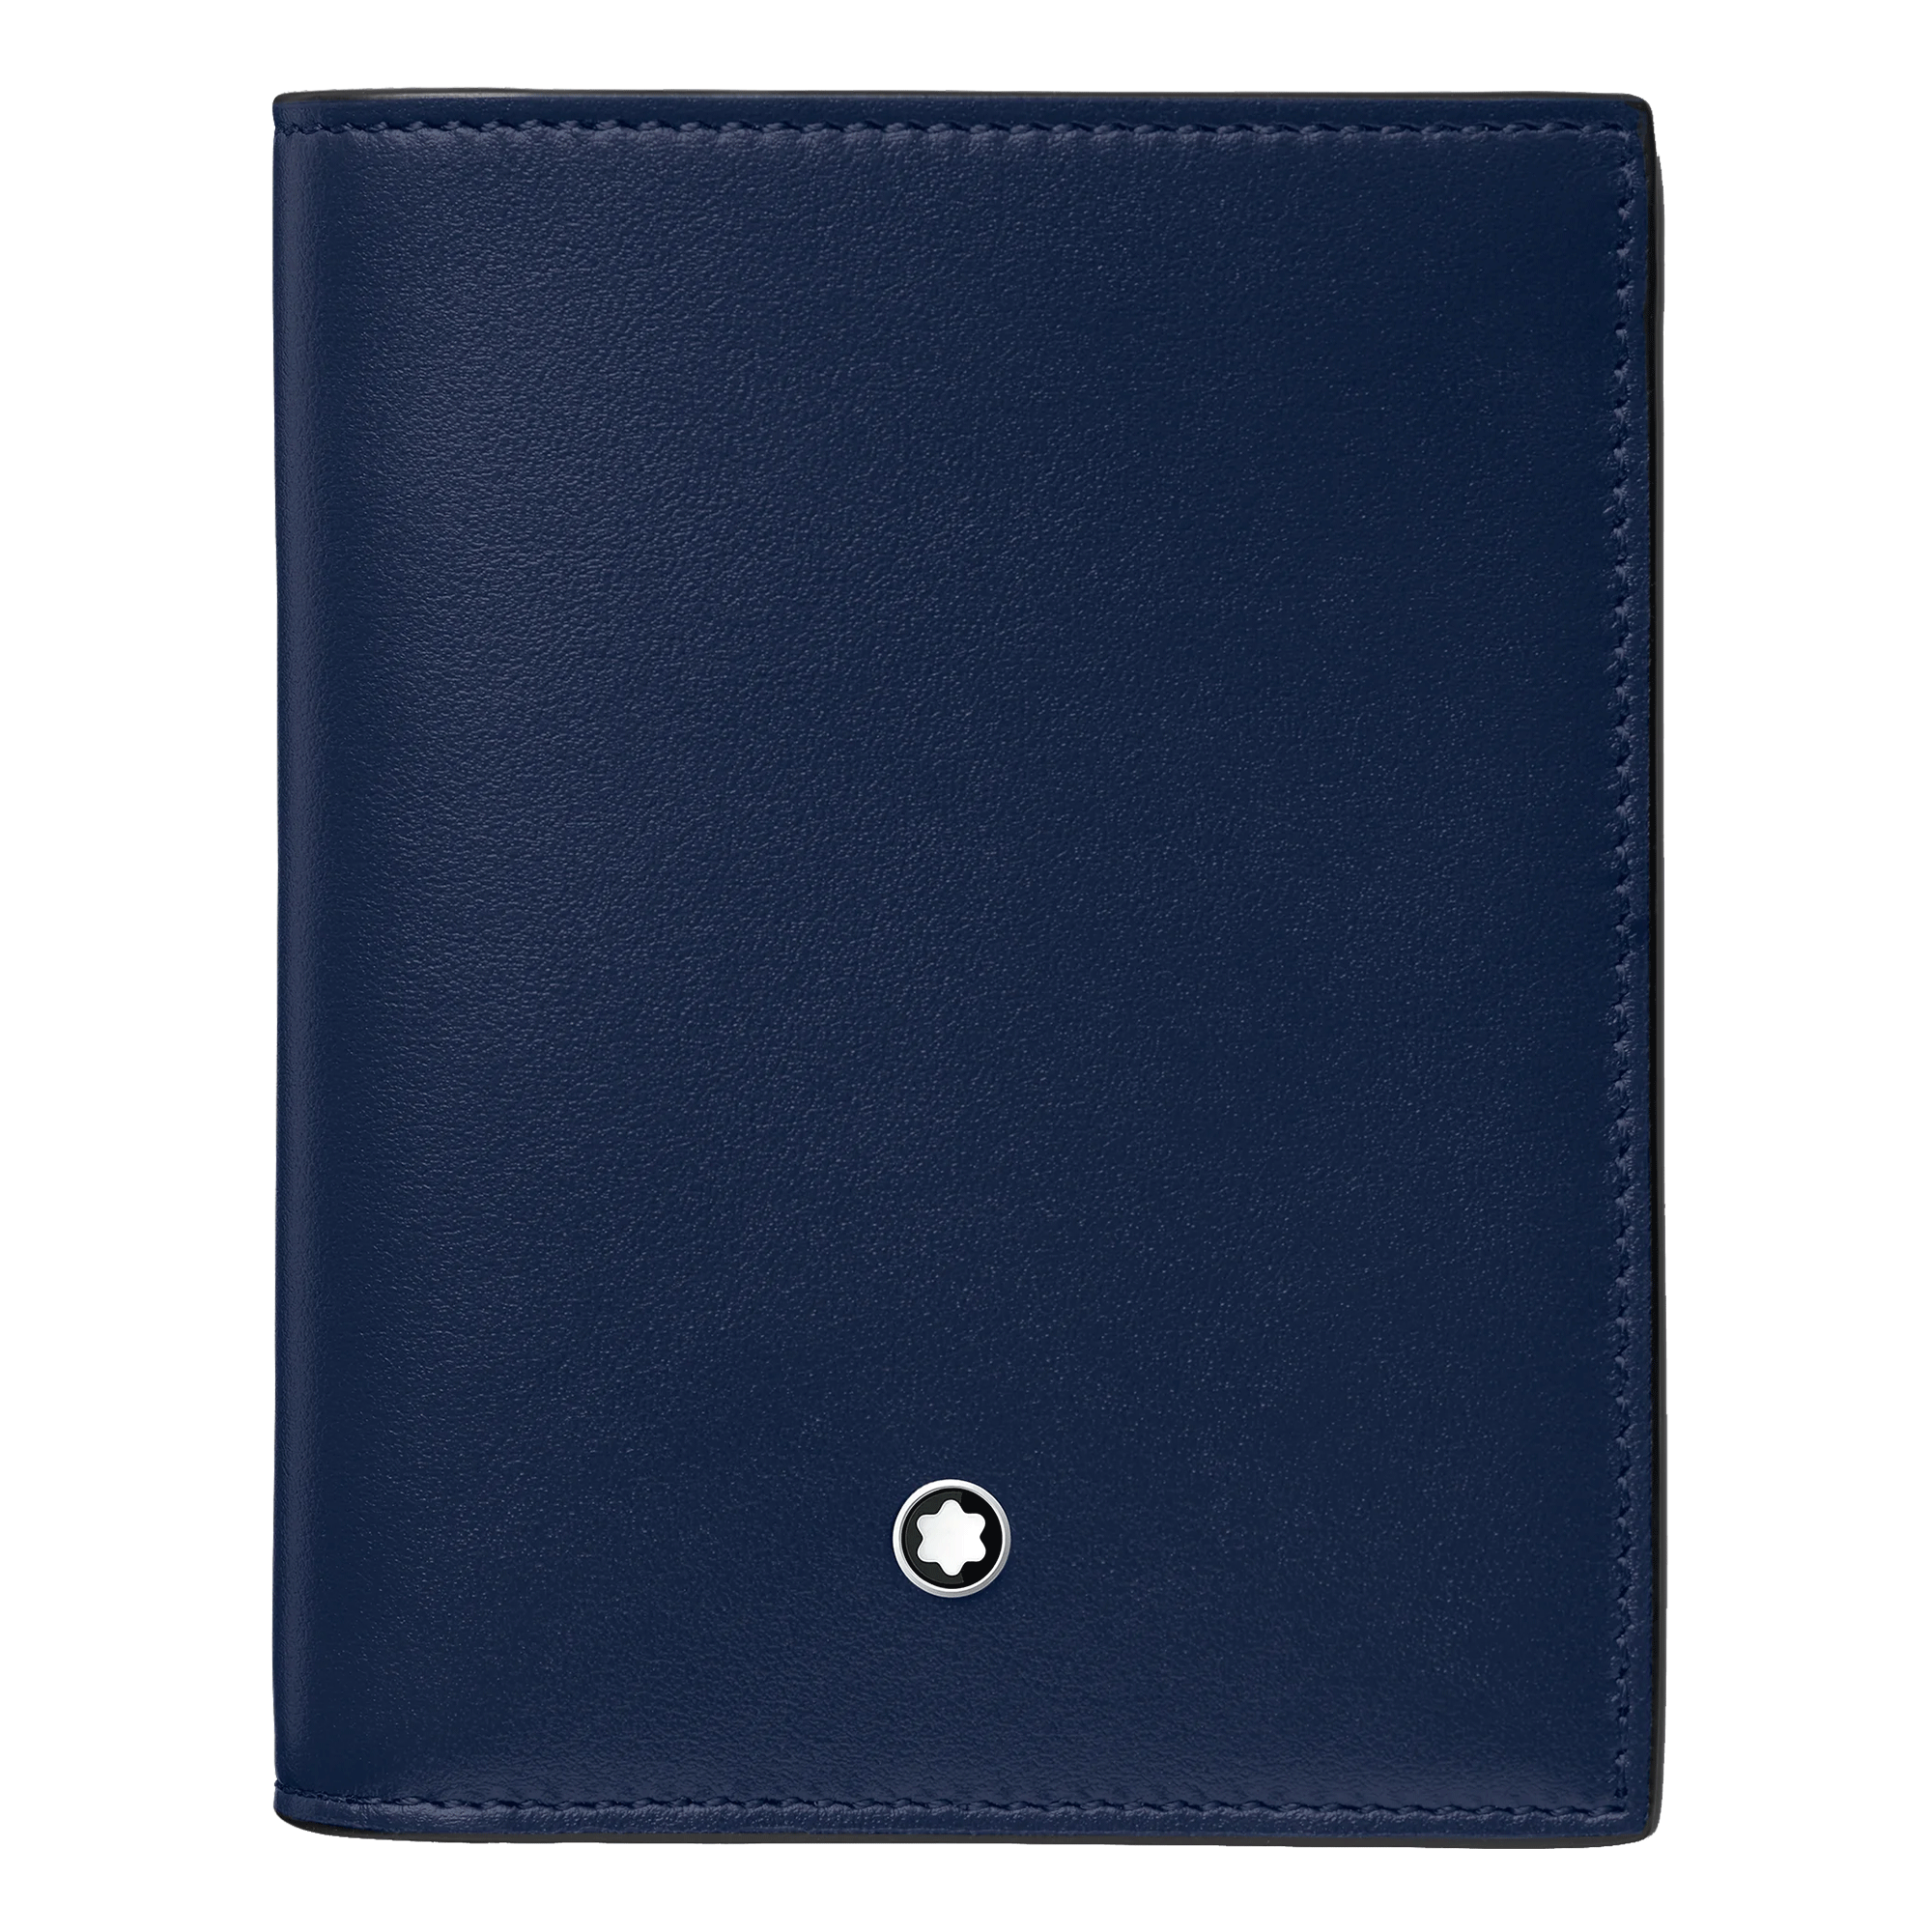 Meisterstuck Compact Wallet 6cc in Ink Blue Leather